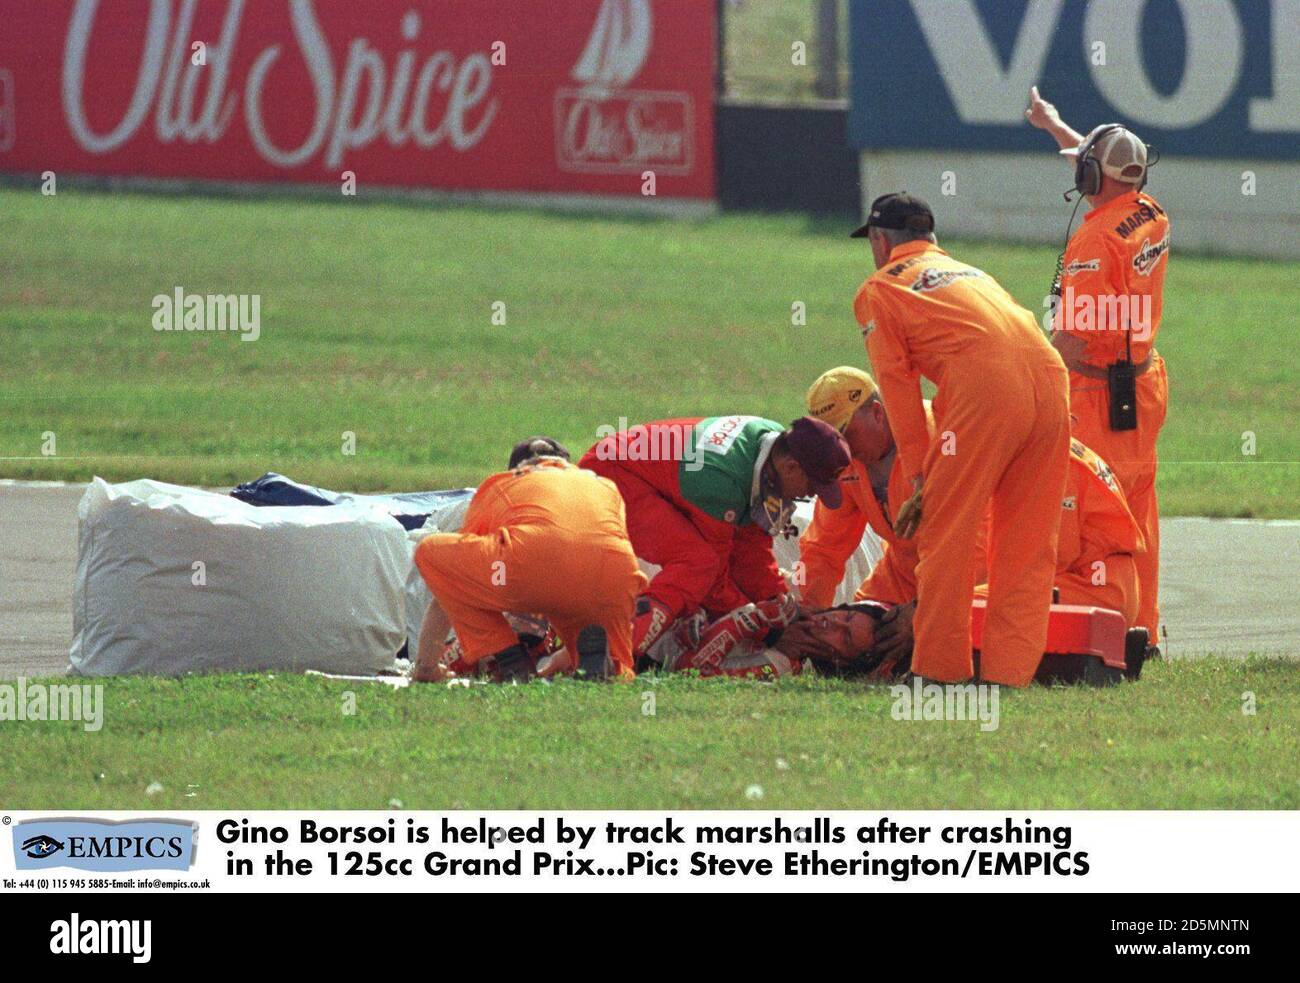 Gino Borsoi is helped by track marshalls after crashing in the 125cc Grand Prix Stock Photo